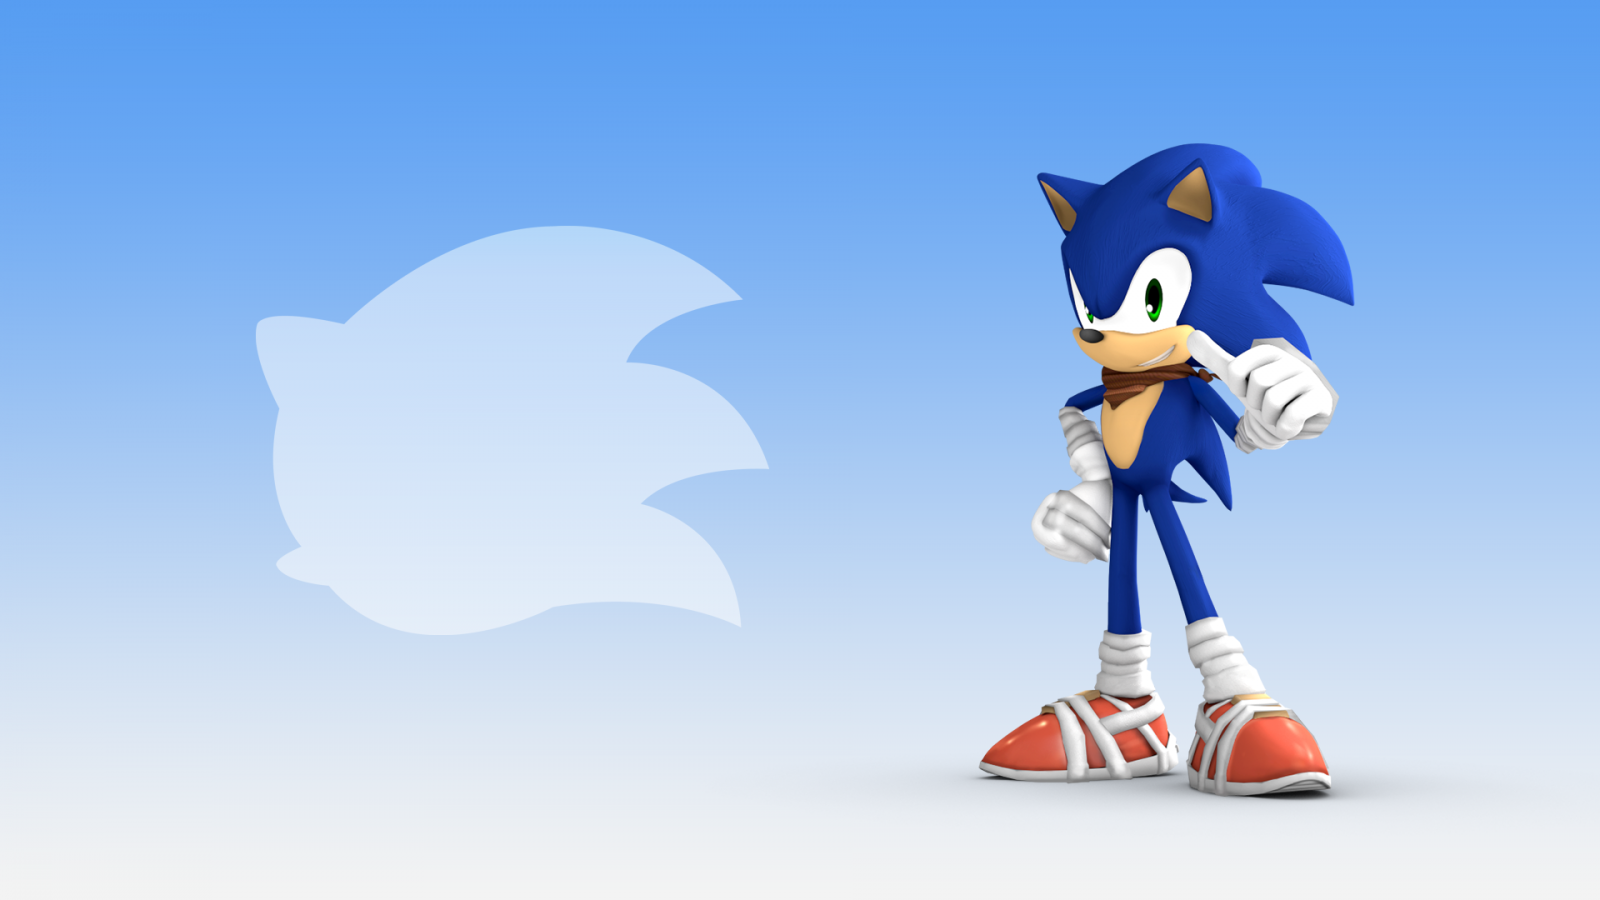 Free download Sonic Boom Sonic Wallpaper [Smash 3] by ryo 10pa [1920x1080] for your Desktop, Mobile & Tablet. Explore Sonic 3 Wallpaper. Sonic 3 Wallpaper, Sonic Unleashed Wallpaper, Sonic Background